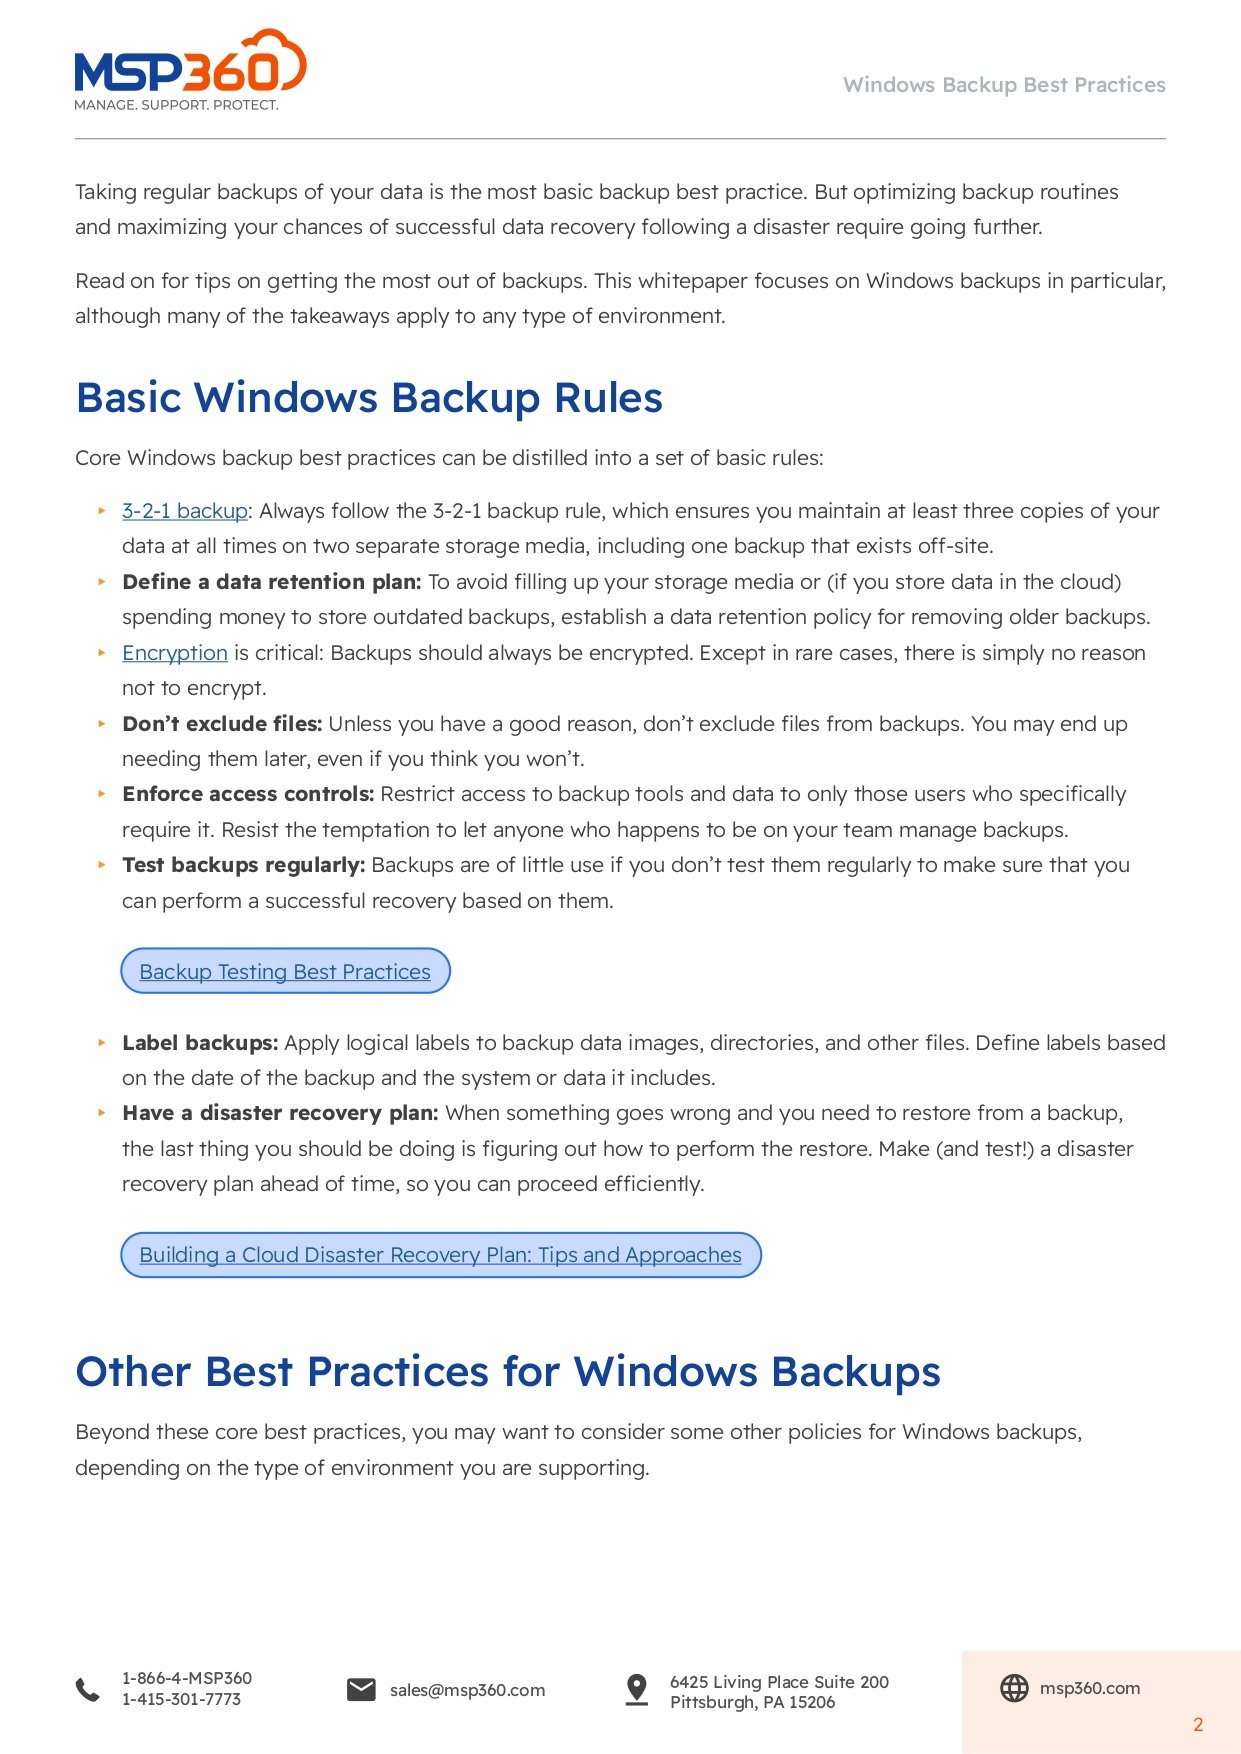 Windows Backup Best Practices_page-0002